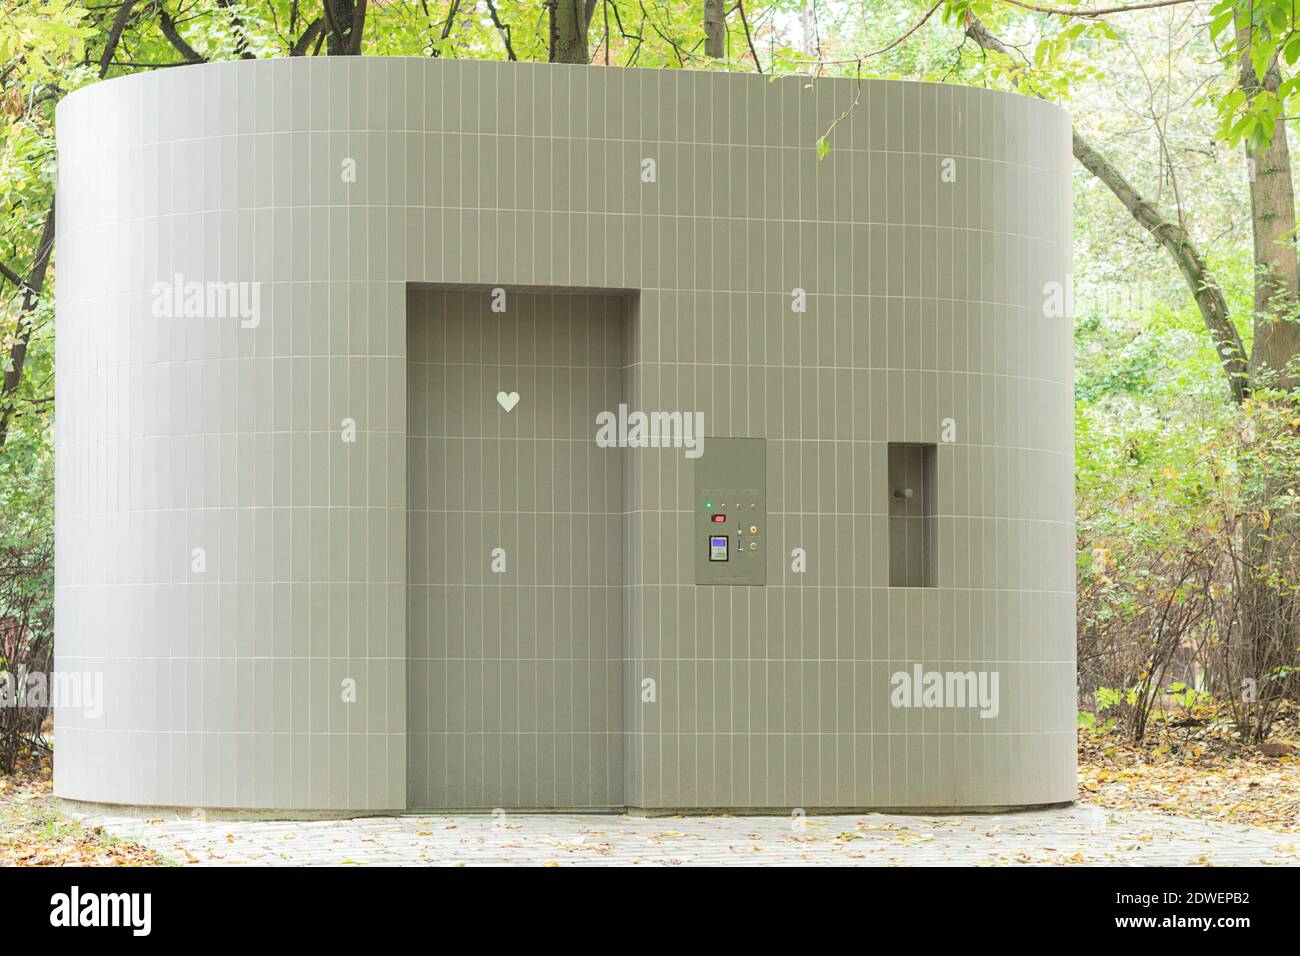 Modern and comfortable public toilet in a city park Stock Photo